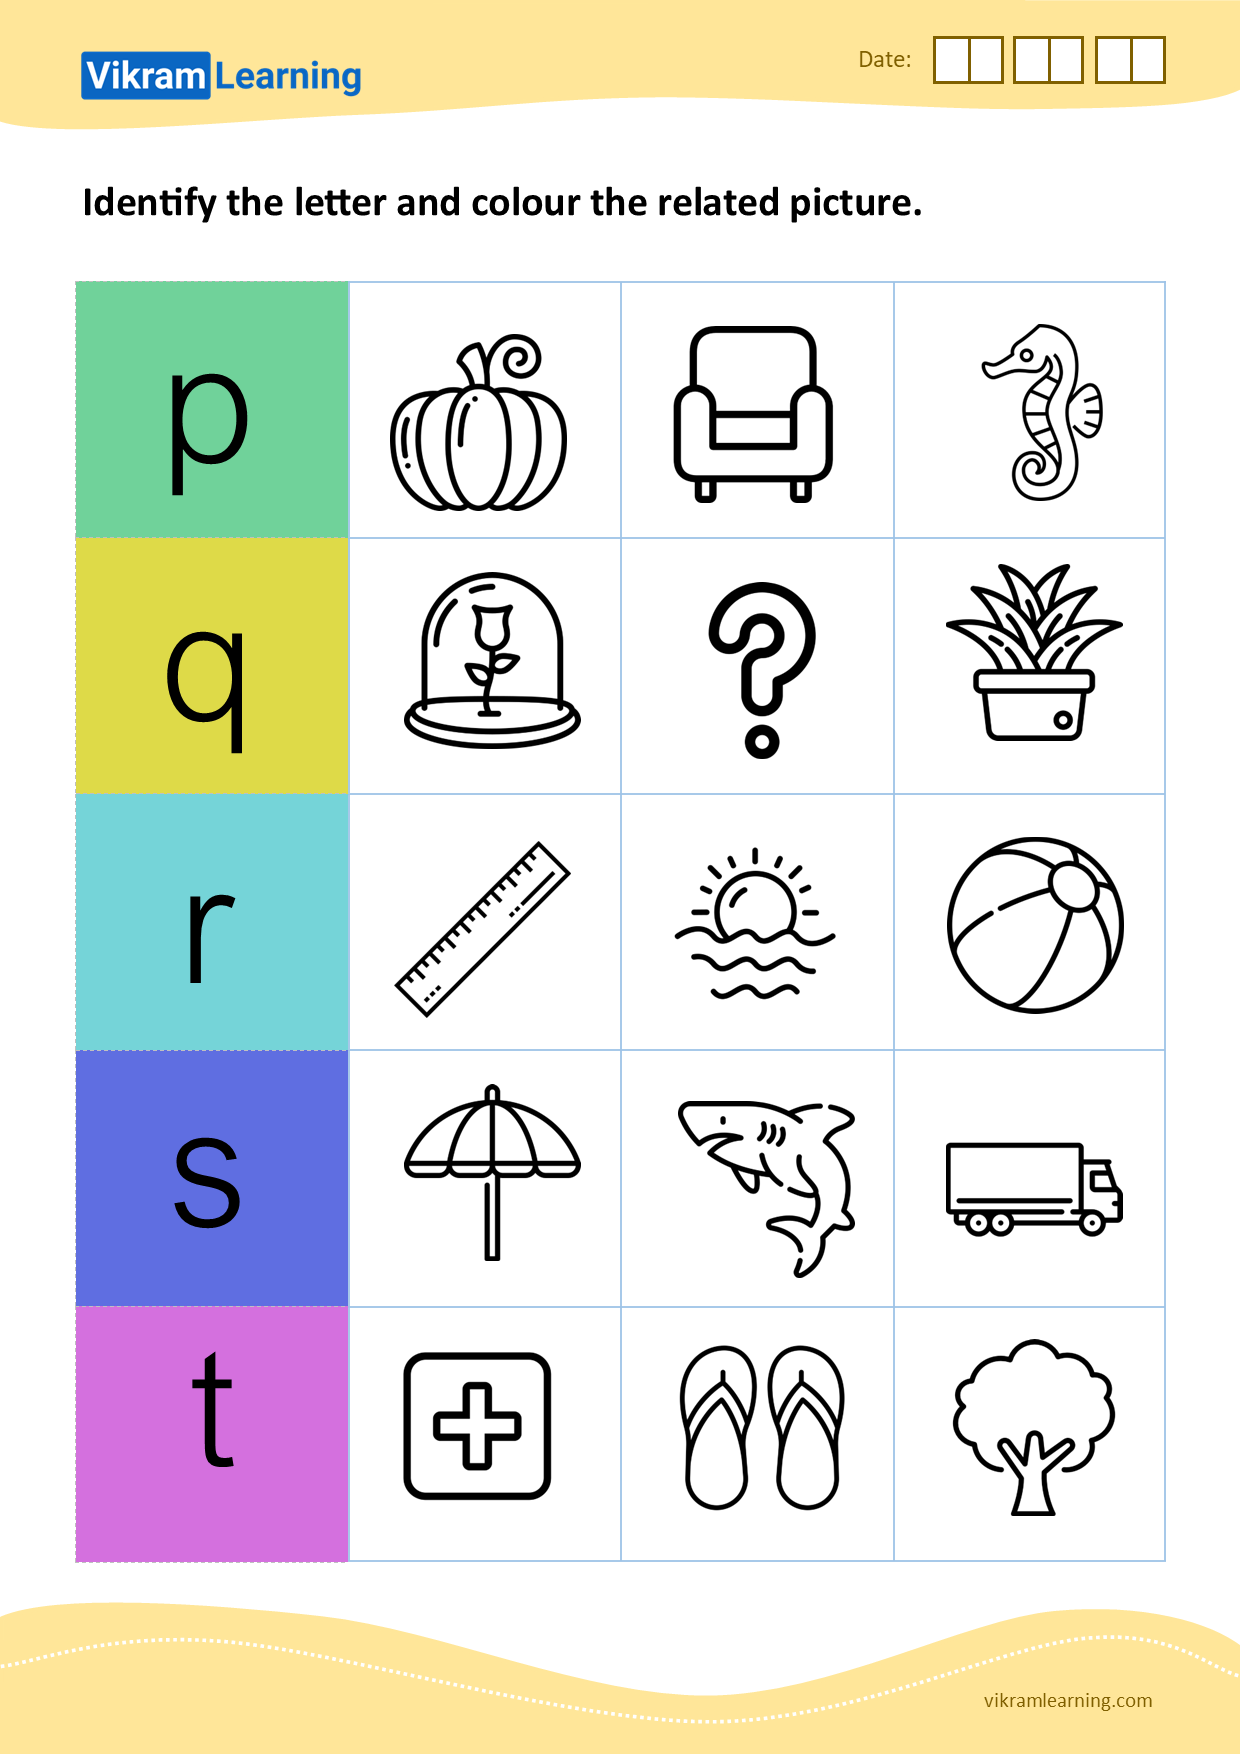 Download identify the letter and colour the related picture (p to t) - pattern 1 worksheets